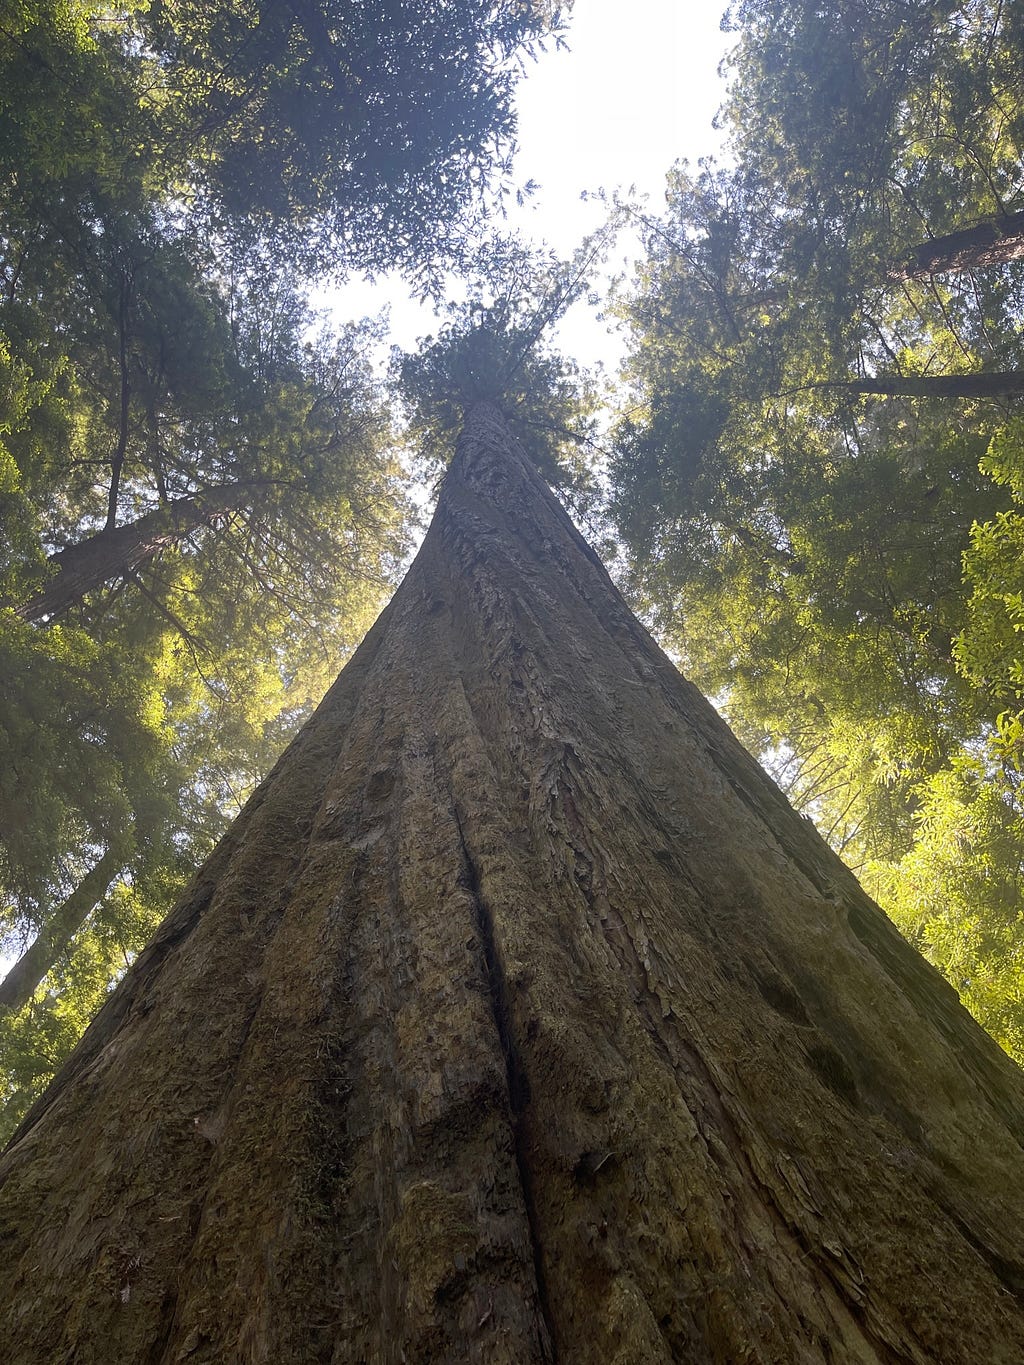 The Founders Tree, Humboldt Redwood State Park